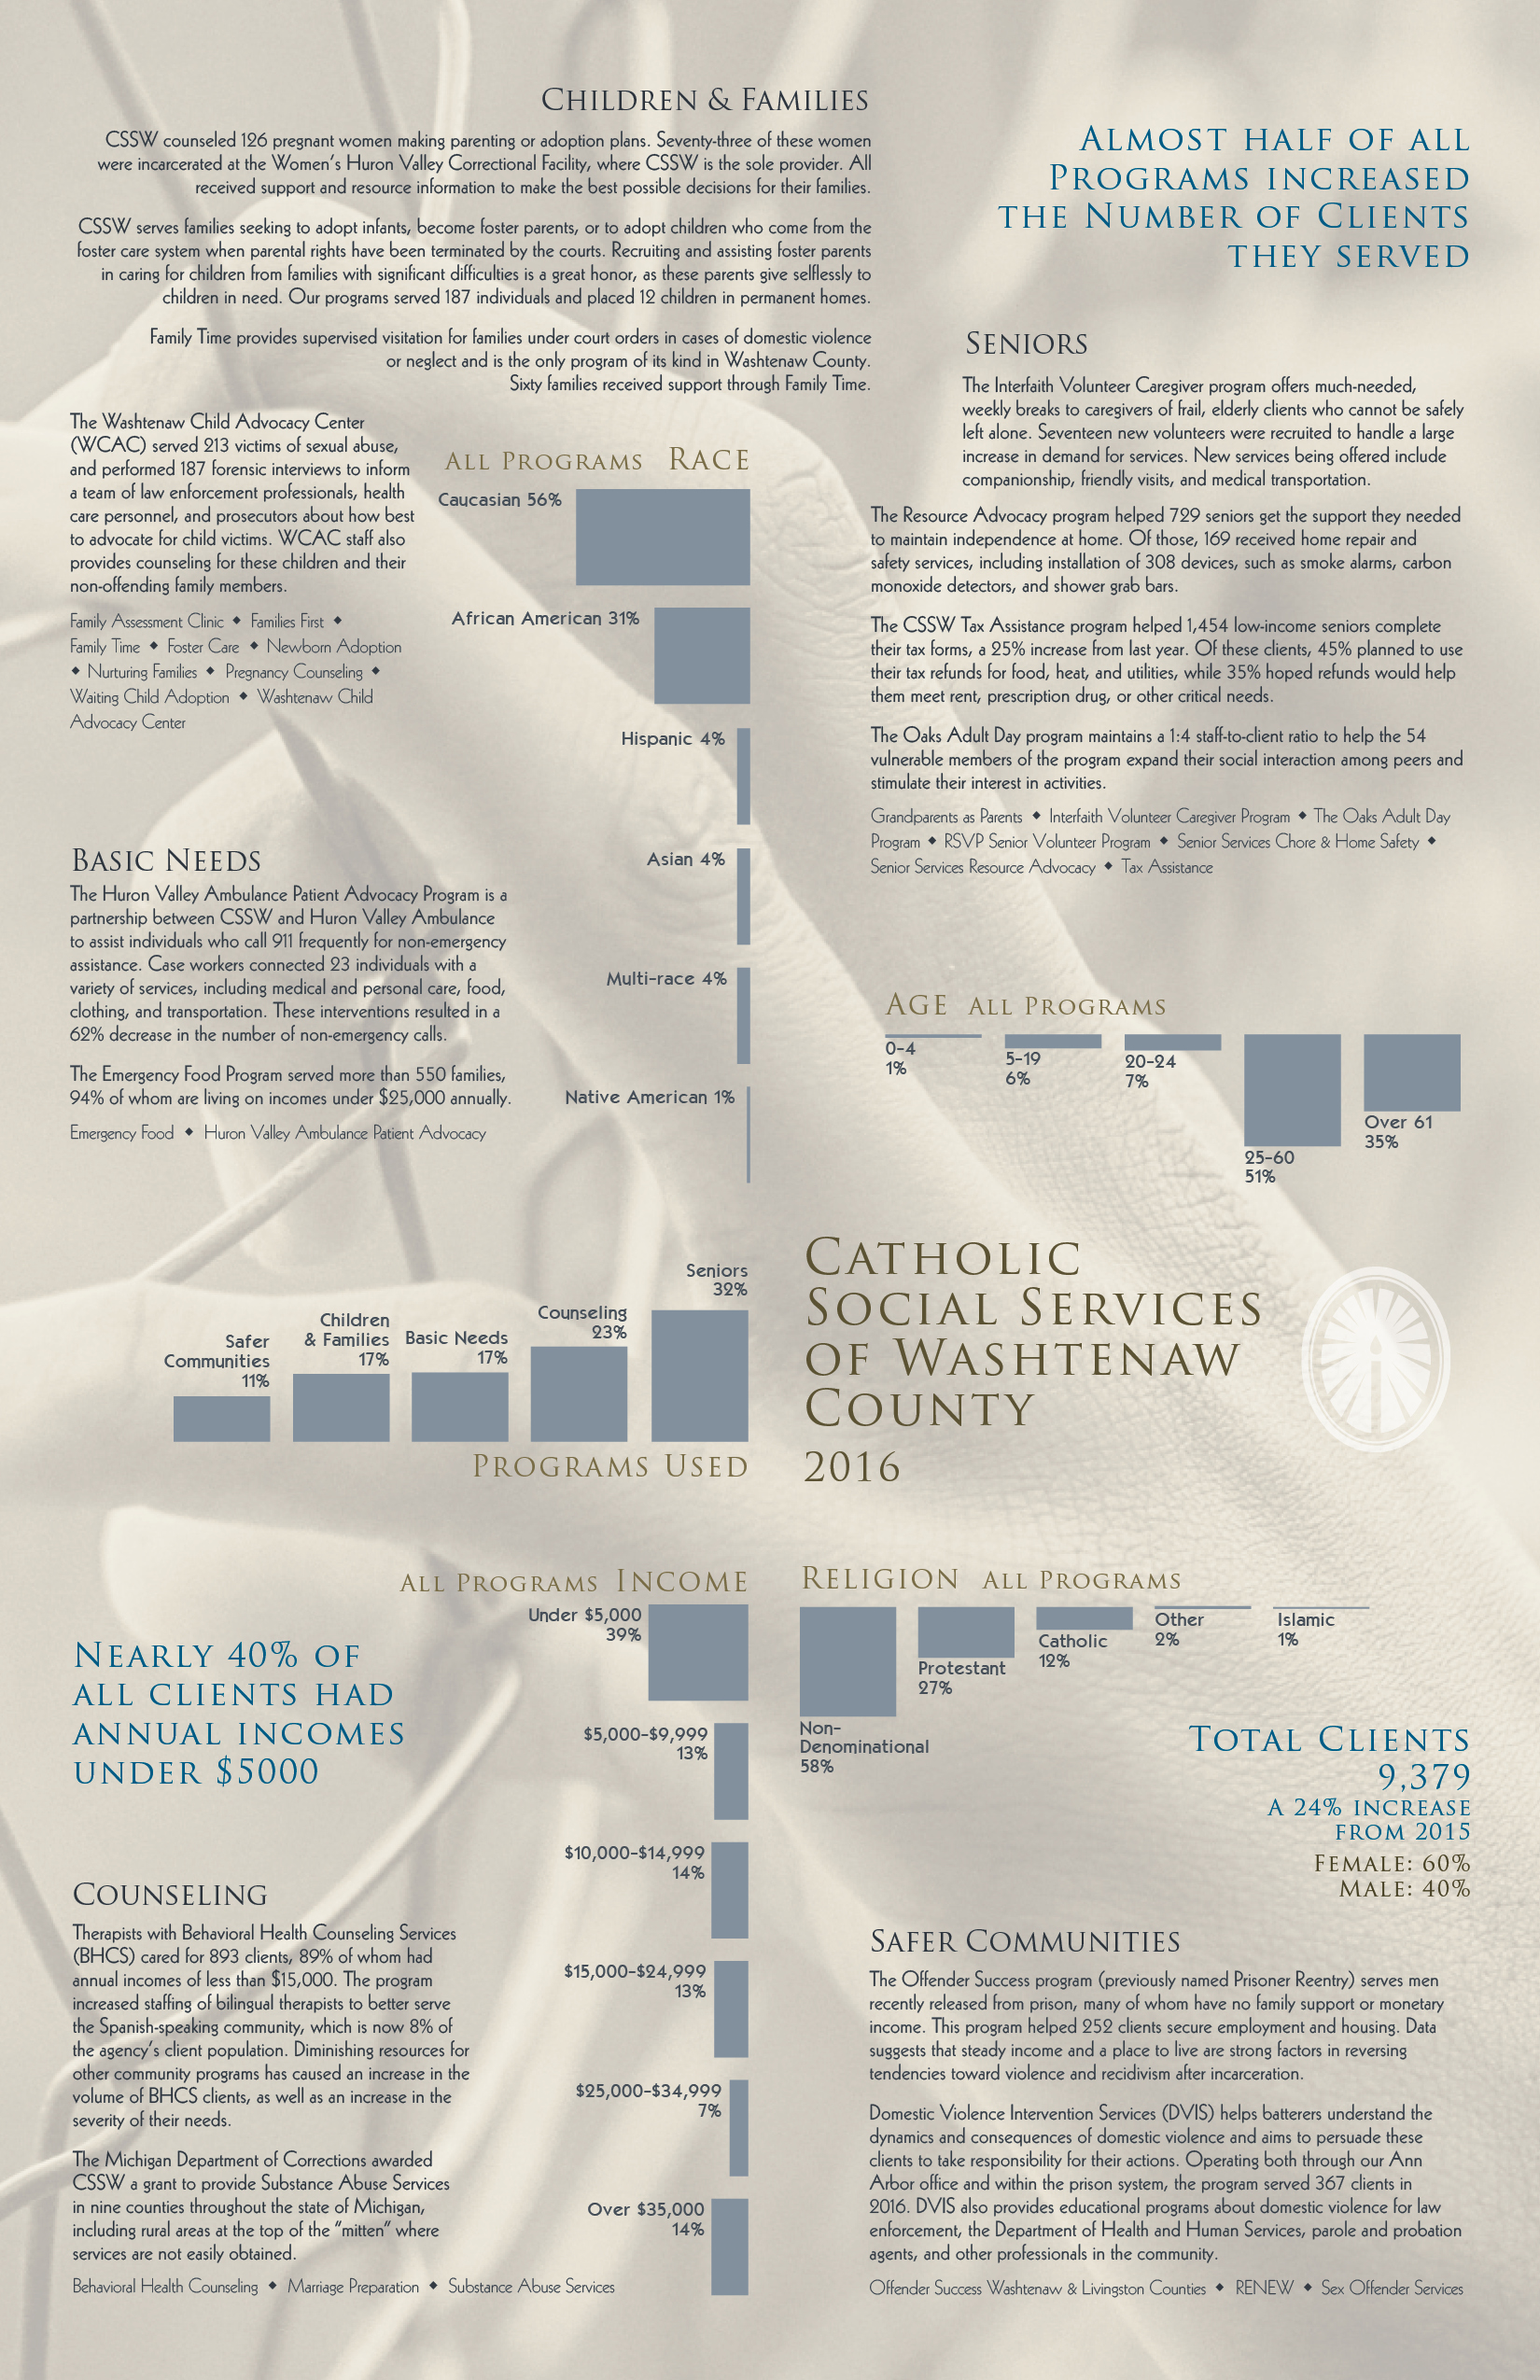 Catholic Social Services of Washtenaw County Annual Report: Inside Foldout.